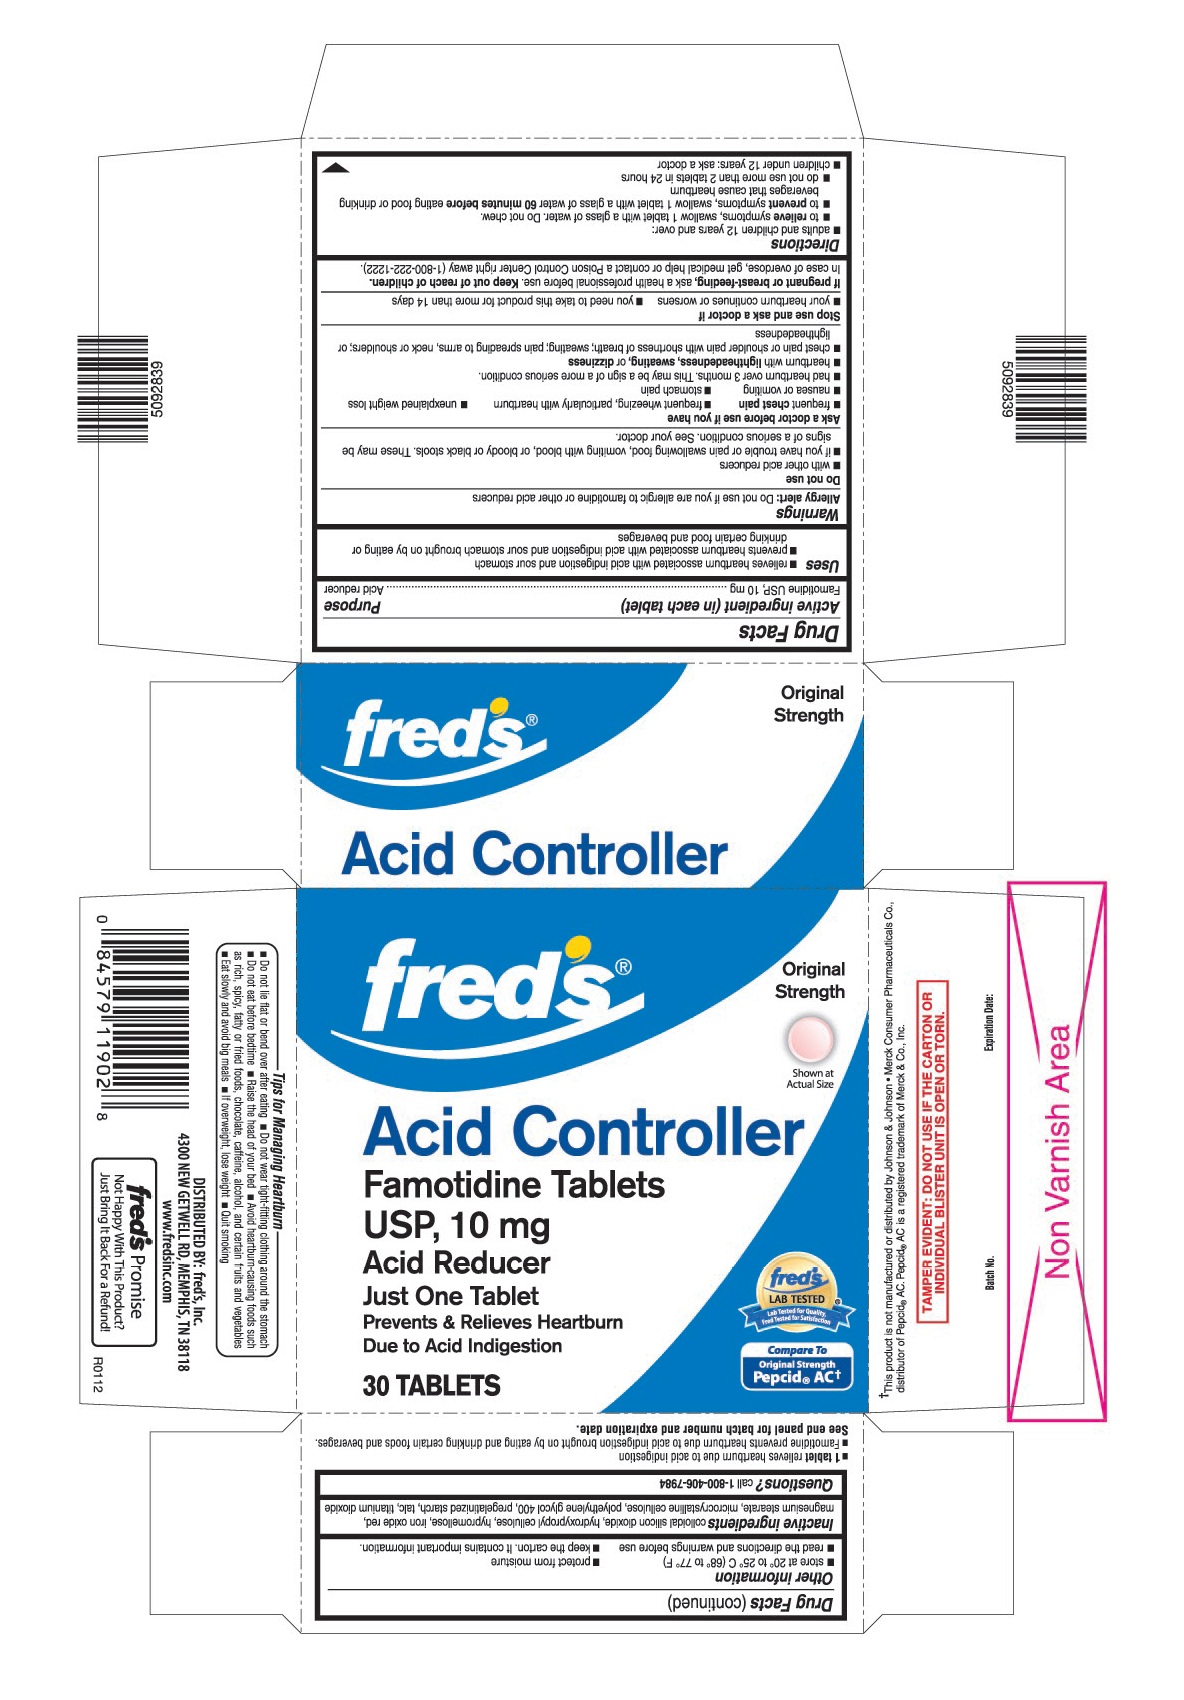 This is the 30 count blister carton label for Fred's Famotidine tablets USP, 10 mg.